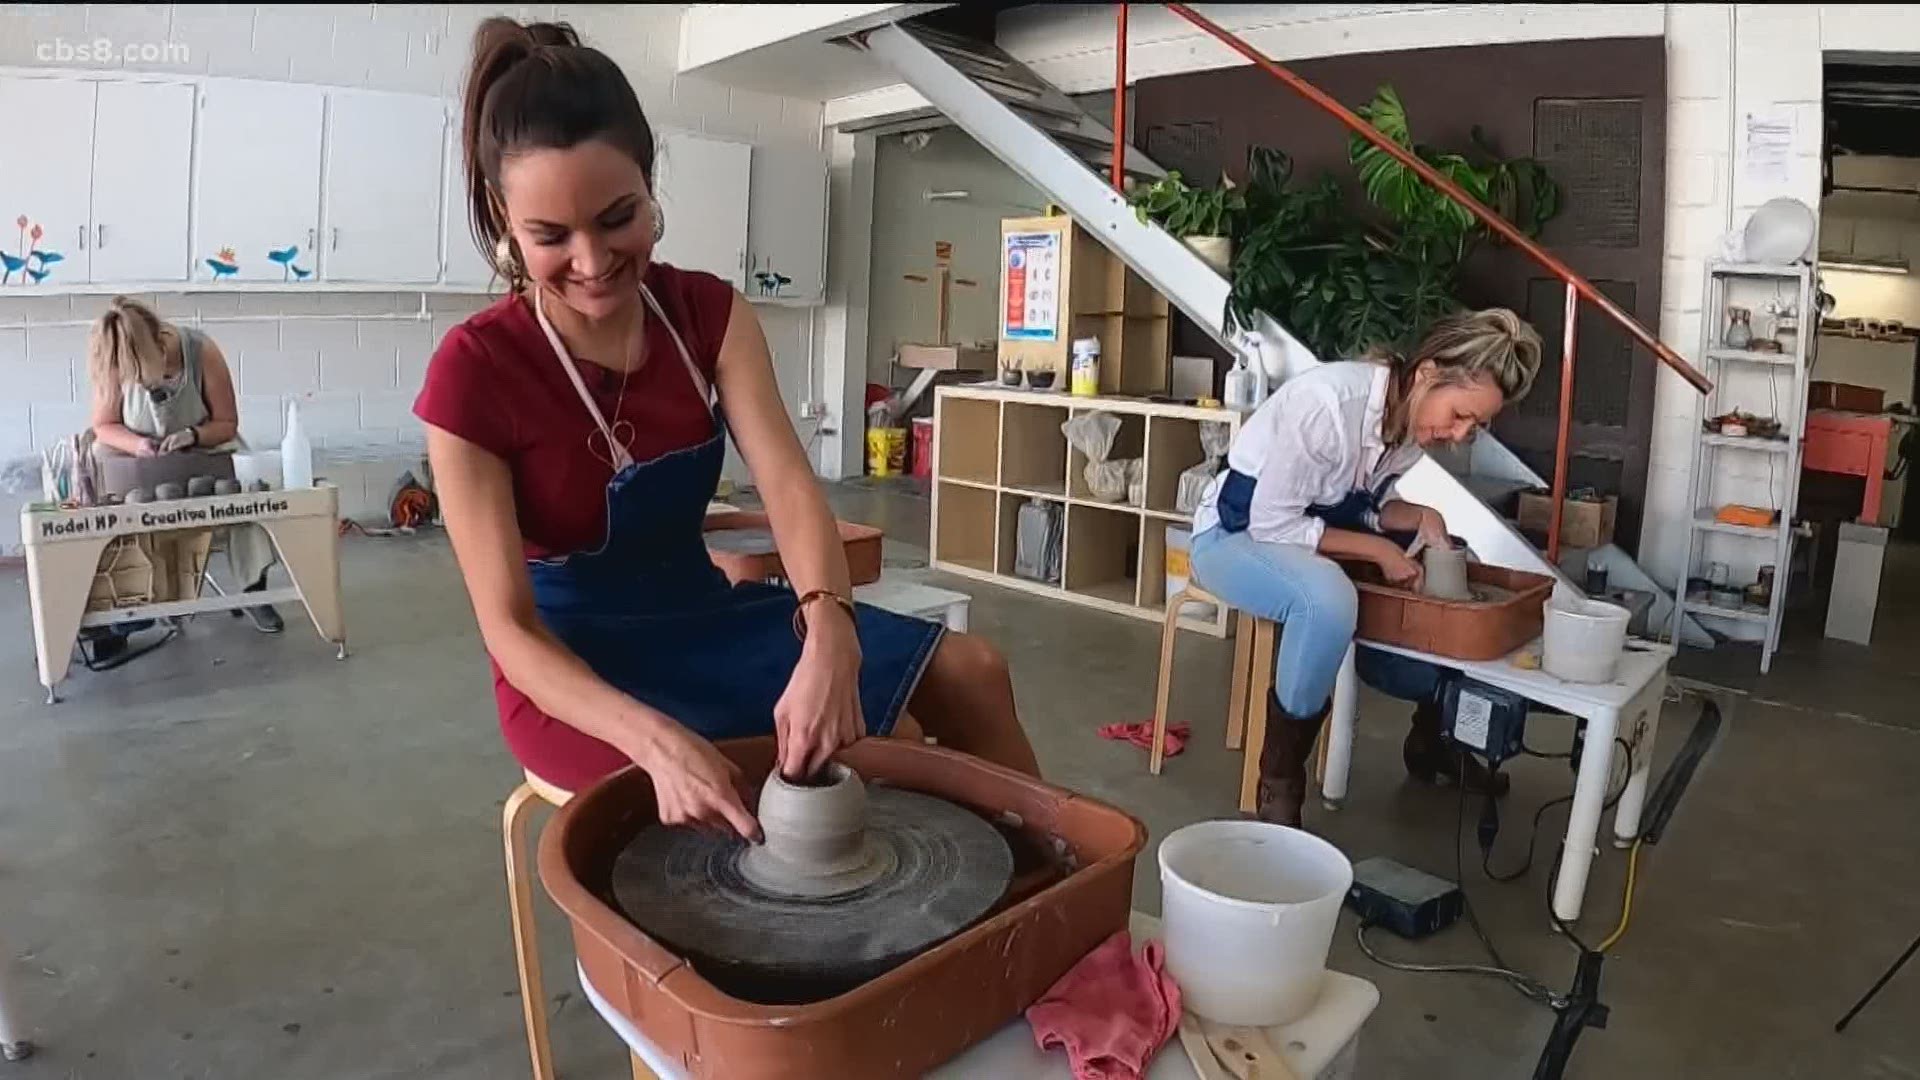 Mud Lily is a creative ceramics studio that promotes community and connection. A place where you can discover, explore and practice creating with clay.